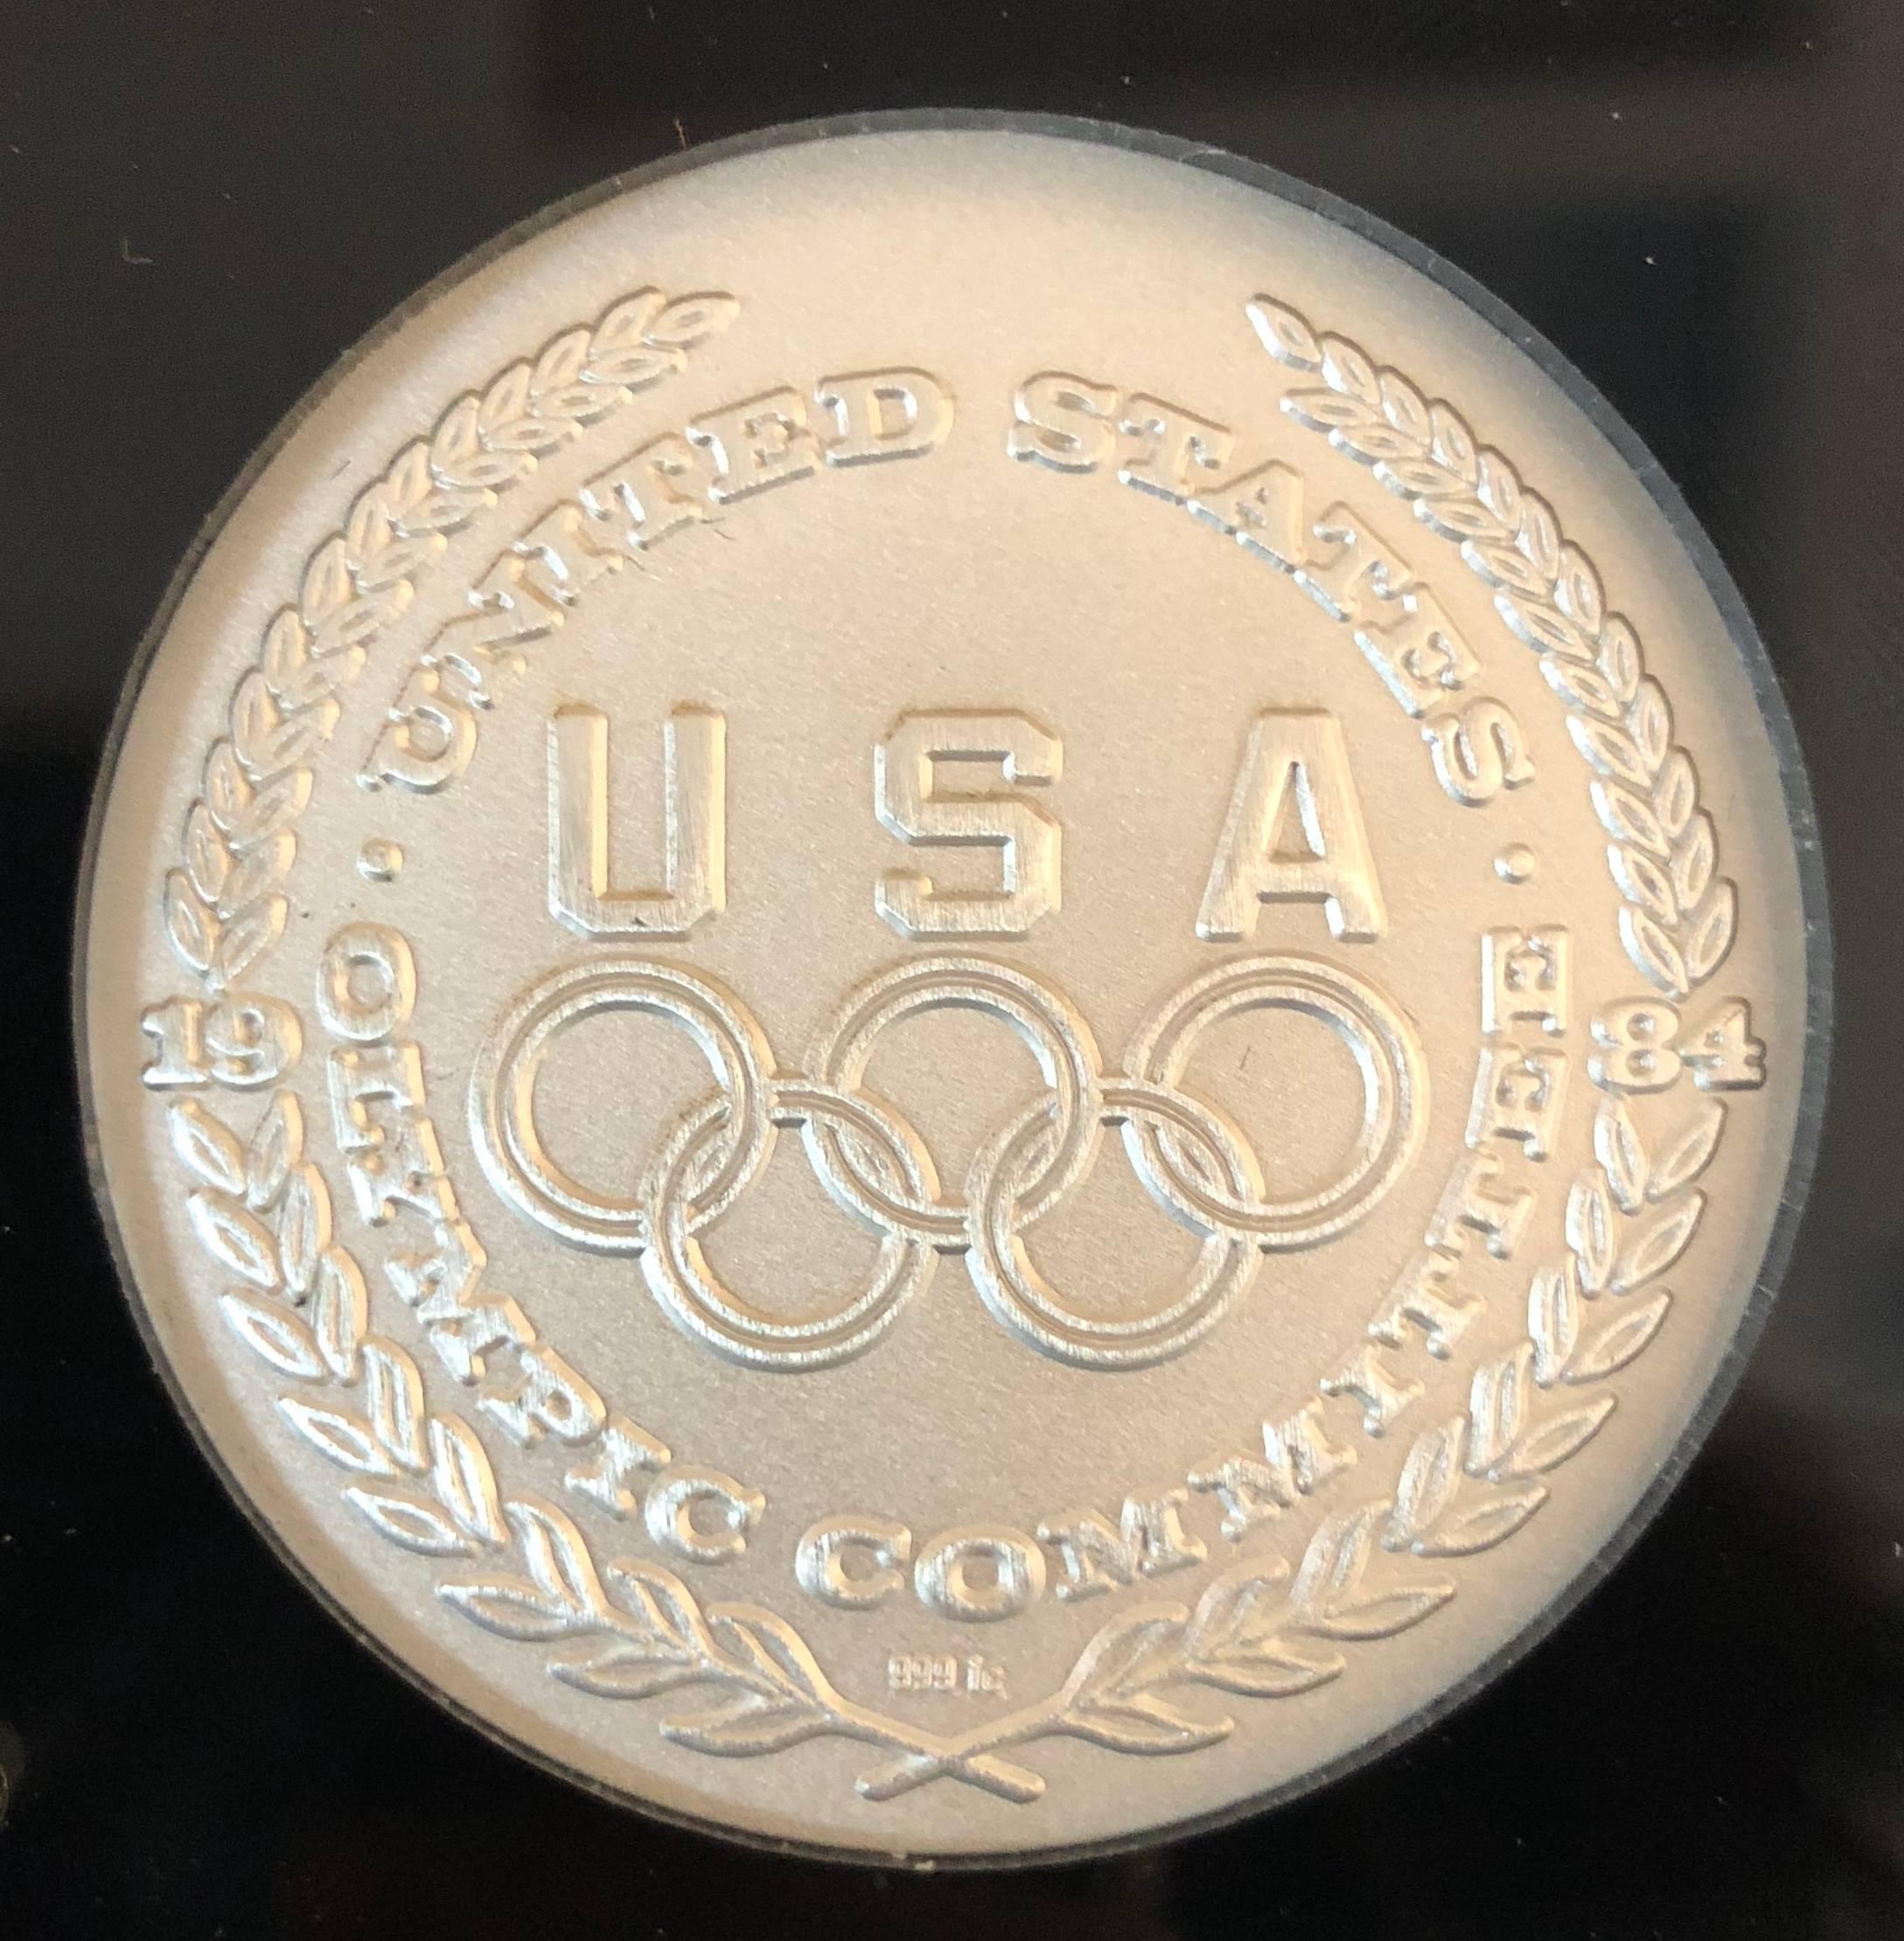 Complete Set of 1984 Olympic Medallions 4